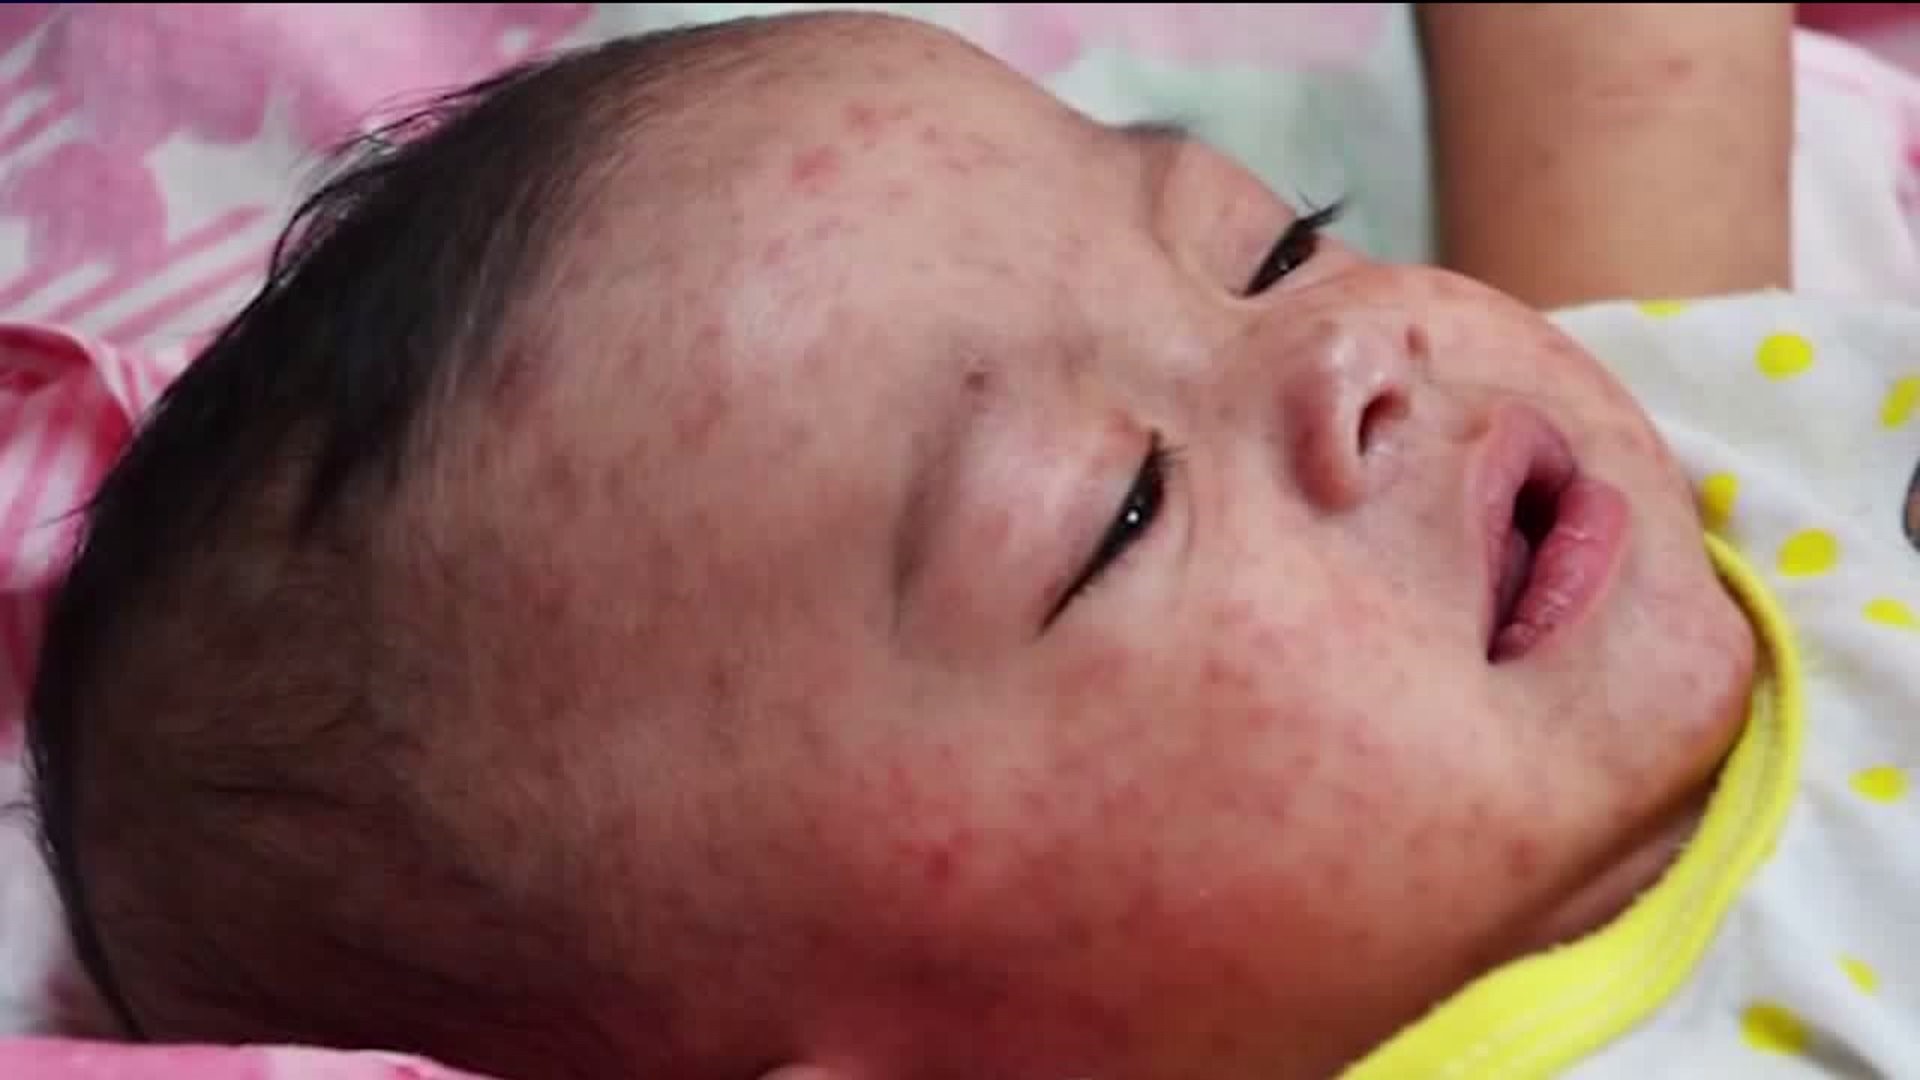 Area Doctors Monitoring Measles Outbreak